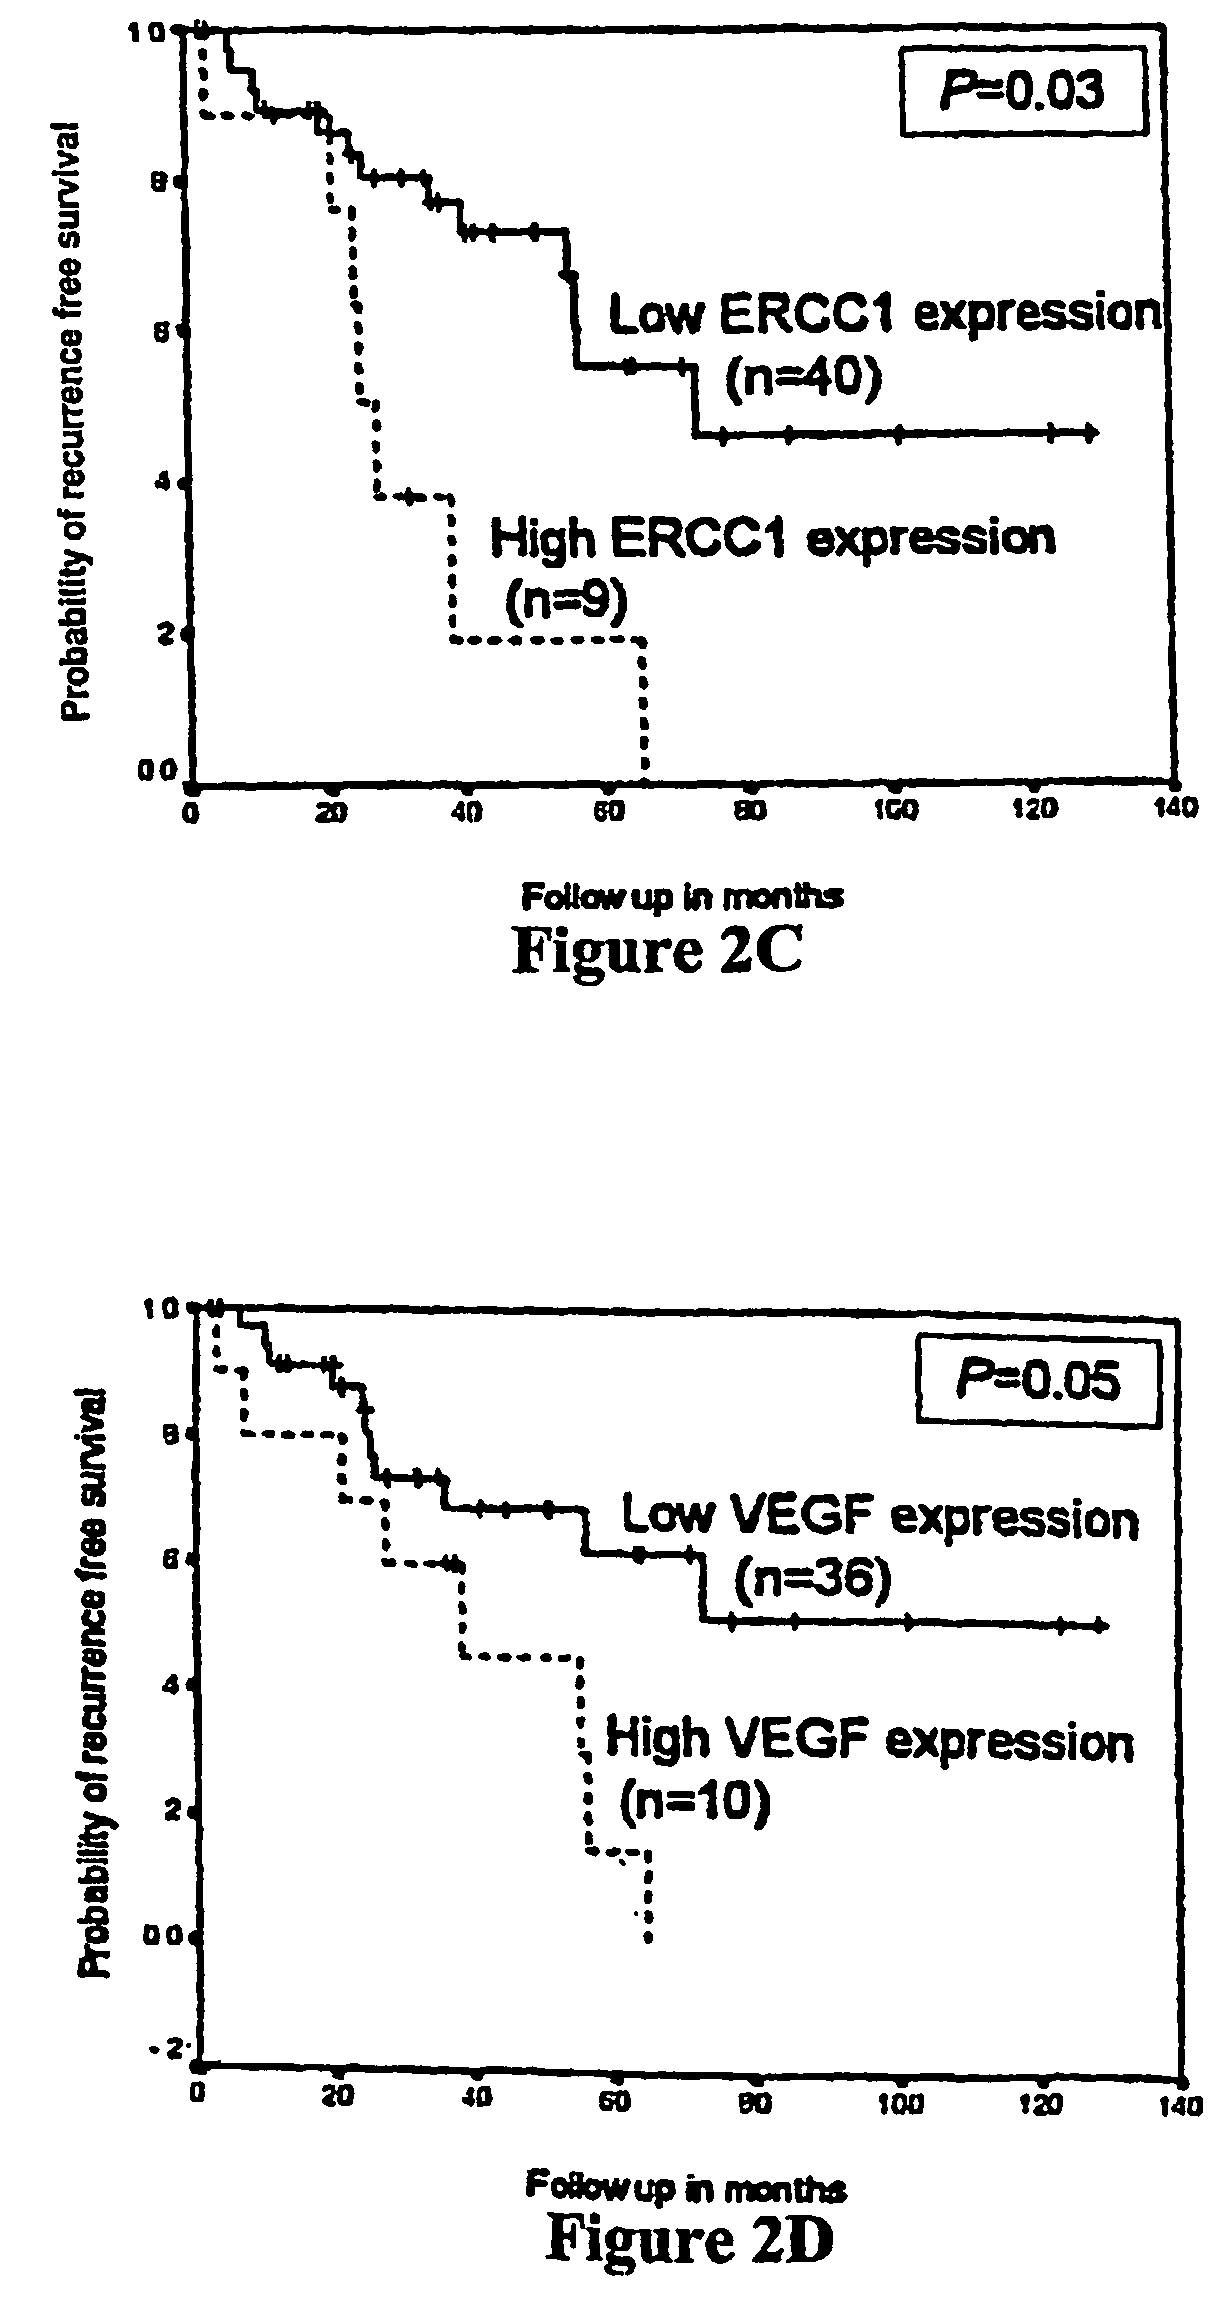 Polymorphisms in the ERCC1 gene for predicting treatment outcome